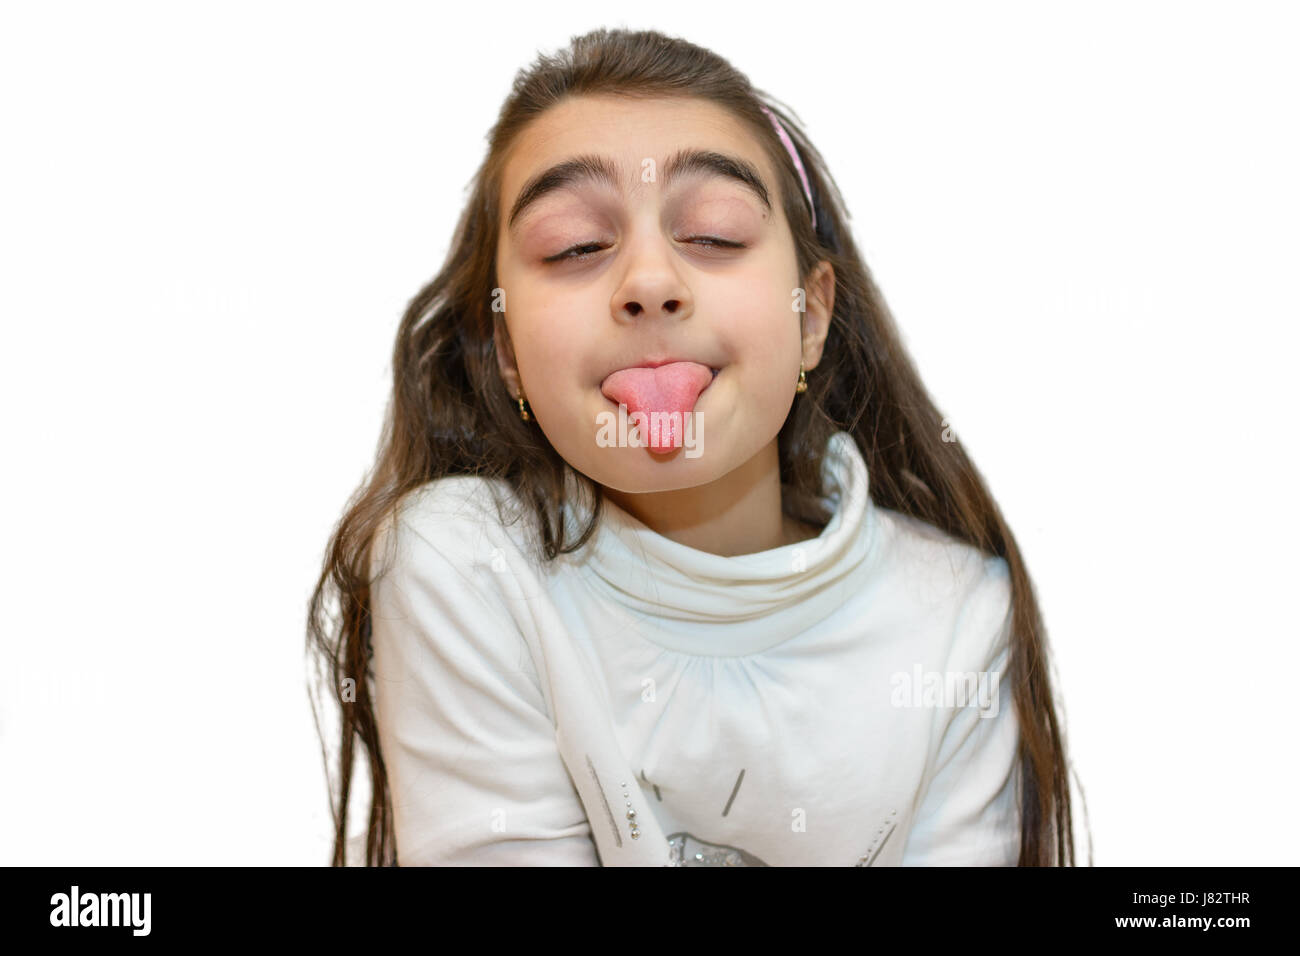 Portrait of young girl with mouthpiece Stock Photo